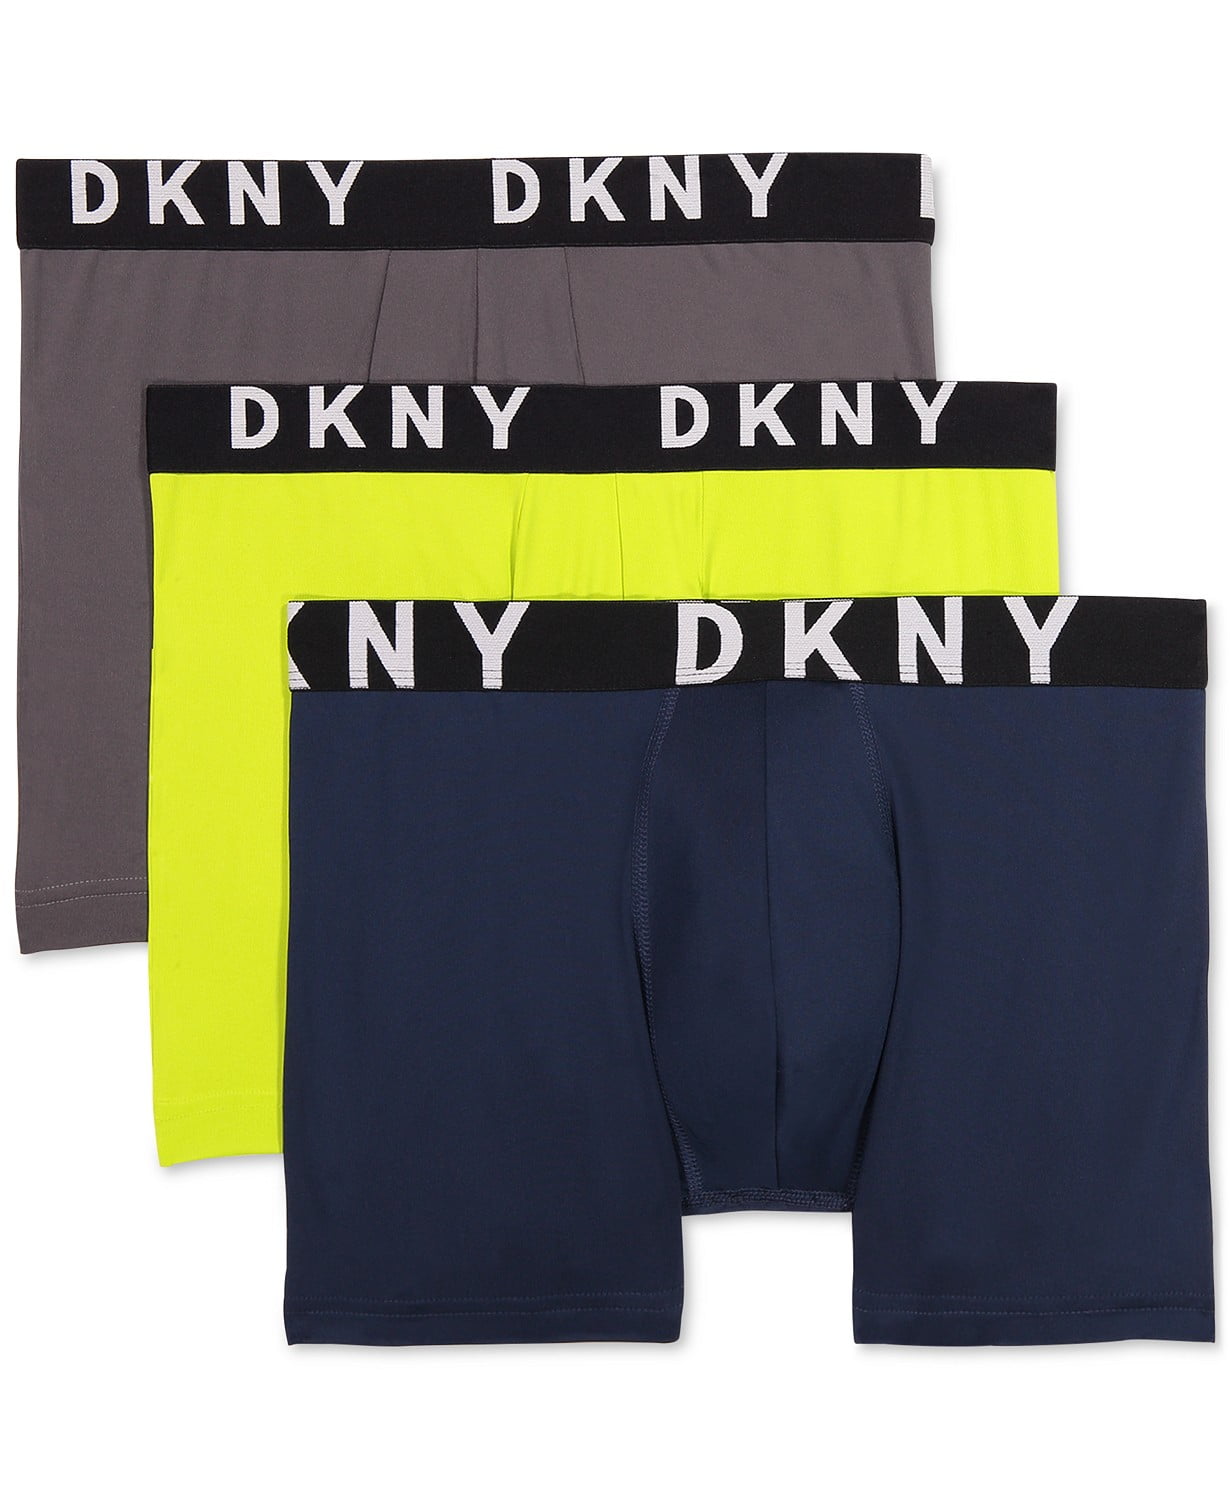 DKNY Mens Underwear Green Small 3 Pack Trunks Boxer Briefs Gray S 